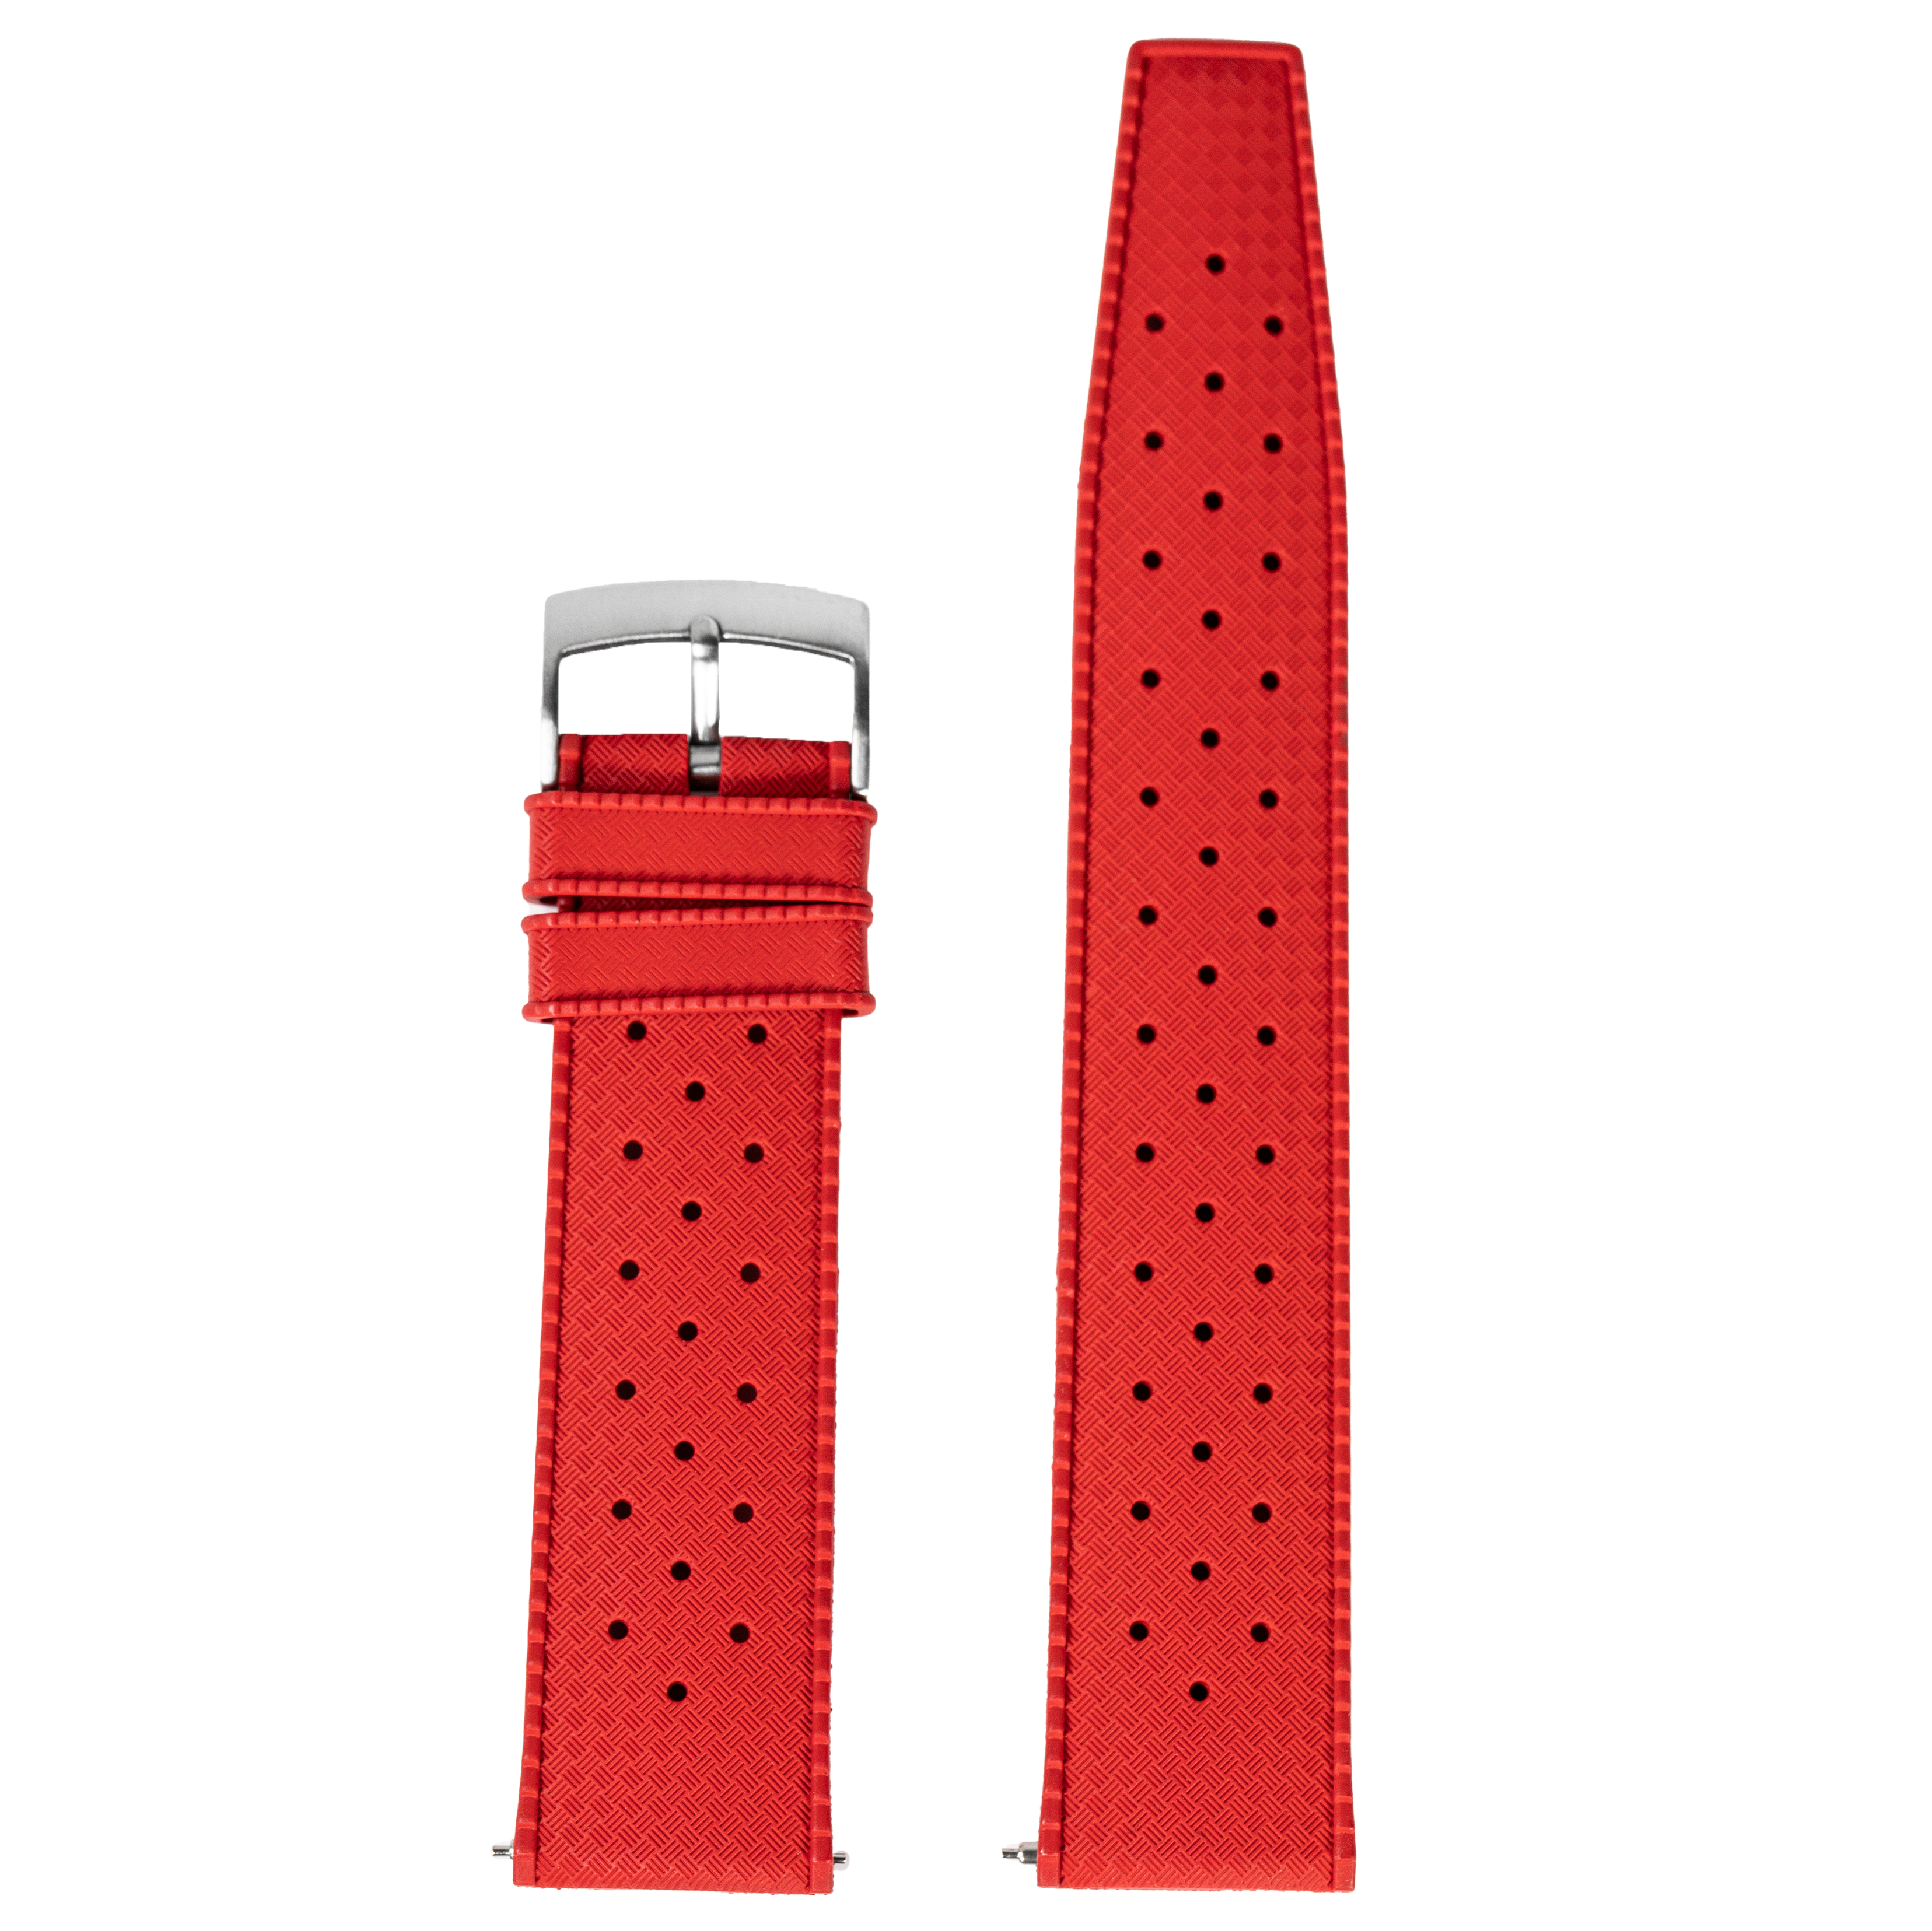 [QuickFit] King Tropic FKM Rubber - Red 22mm